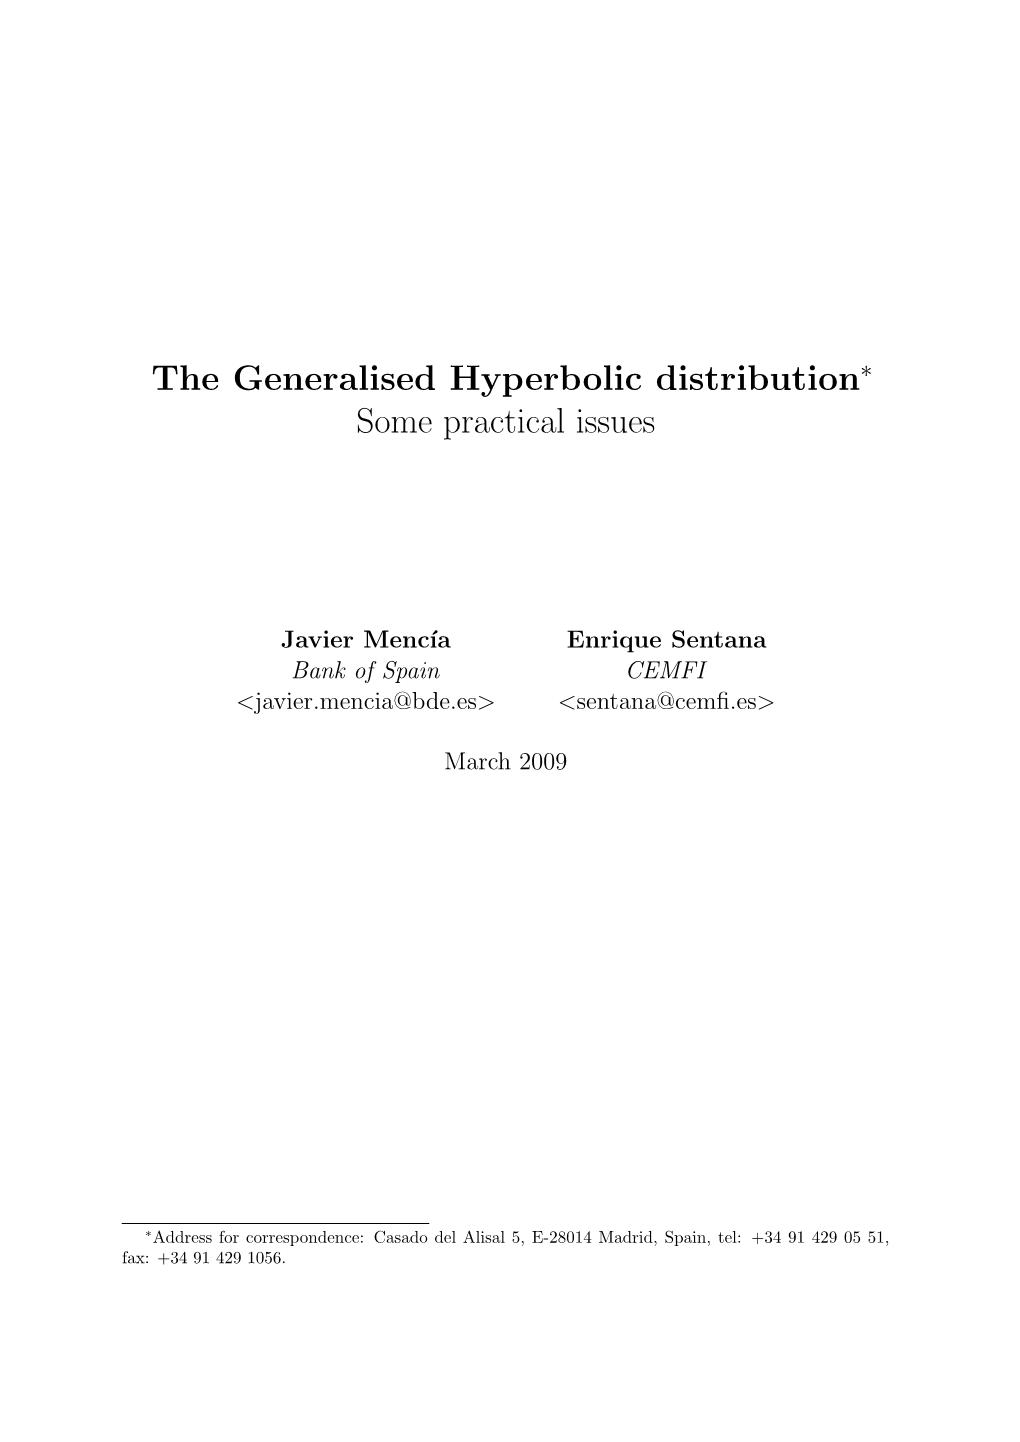 The Generalised Hyperbolic Distribution Some Practical Issues